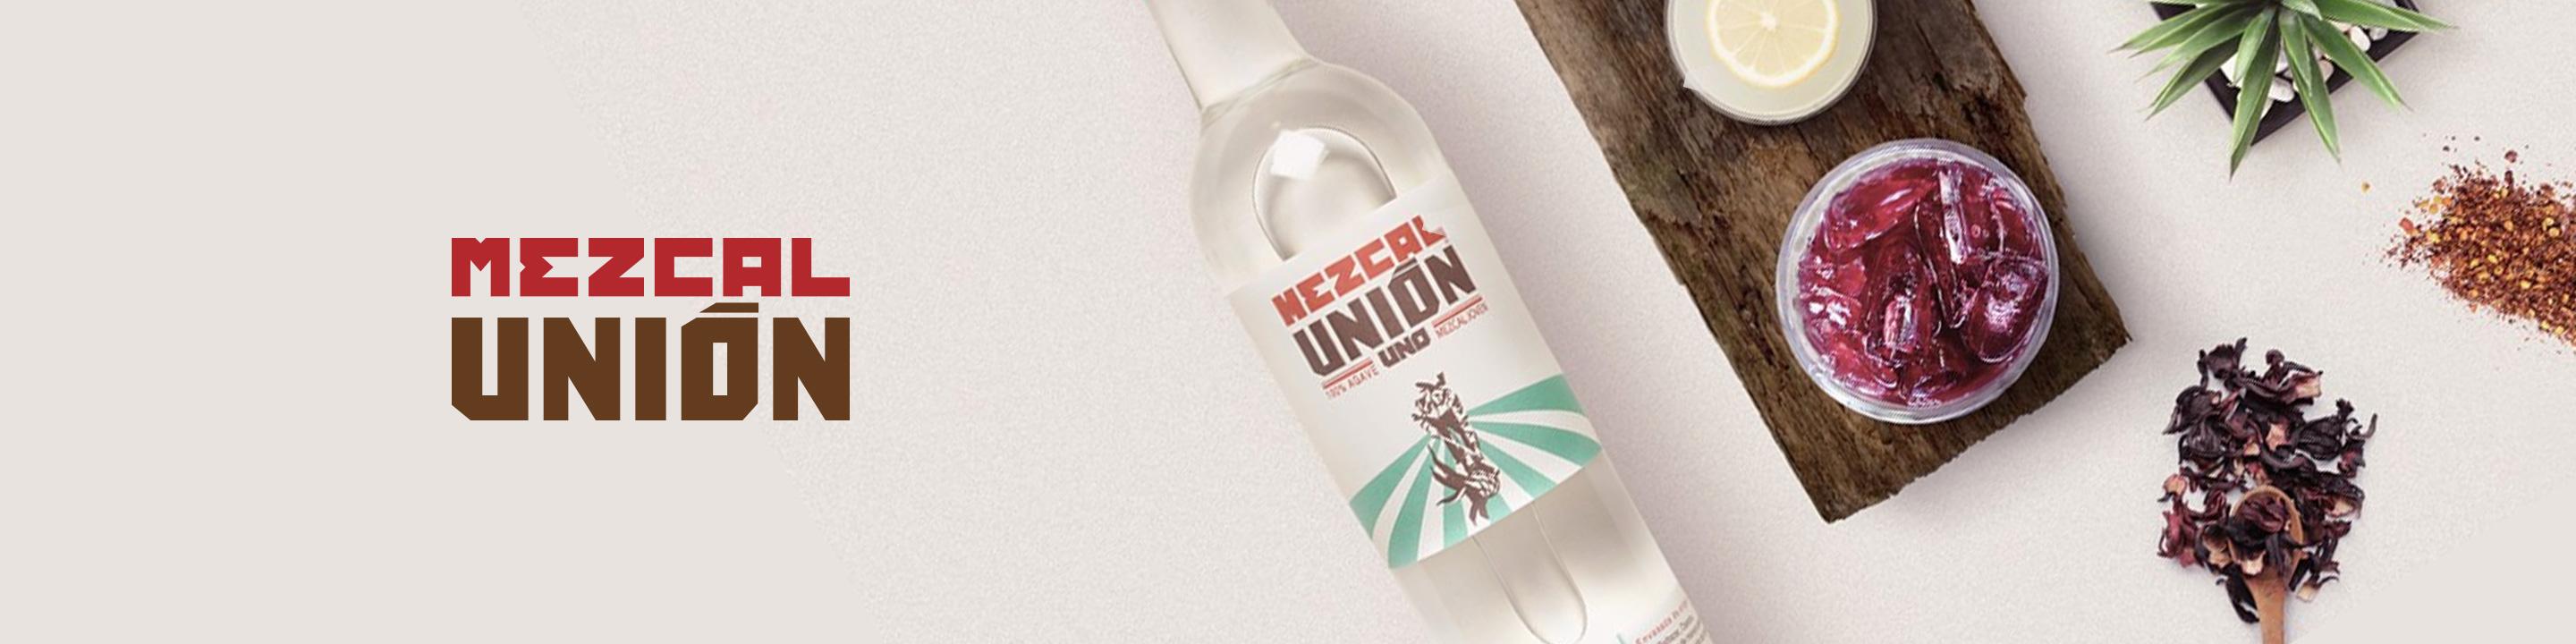 A philosophy, a movement to catalyze collaboration in agave farming and Mezcal production while generating socioeconomic prosperity. We focus on tradition, quality, sustainability and take our social responsibility seriously.  Buy Mezcal Union online now from your nearby liquor store via Minibar Delivery.